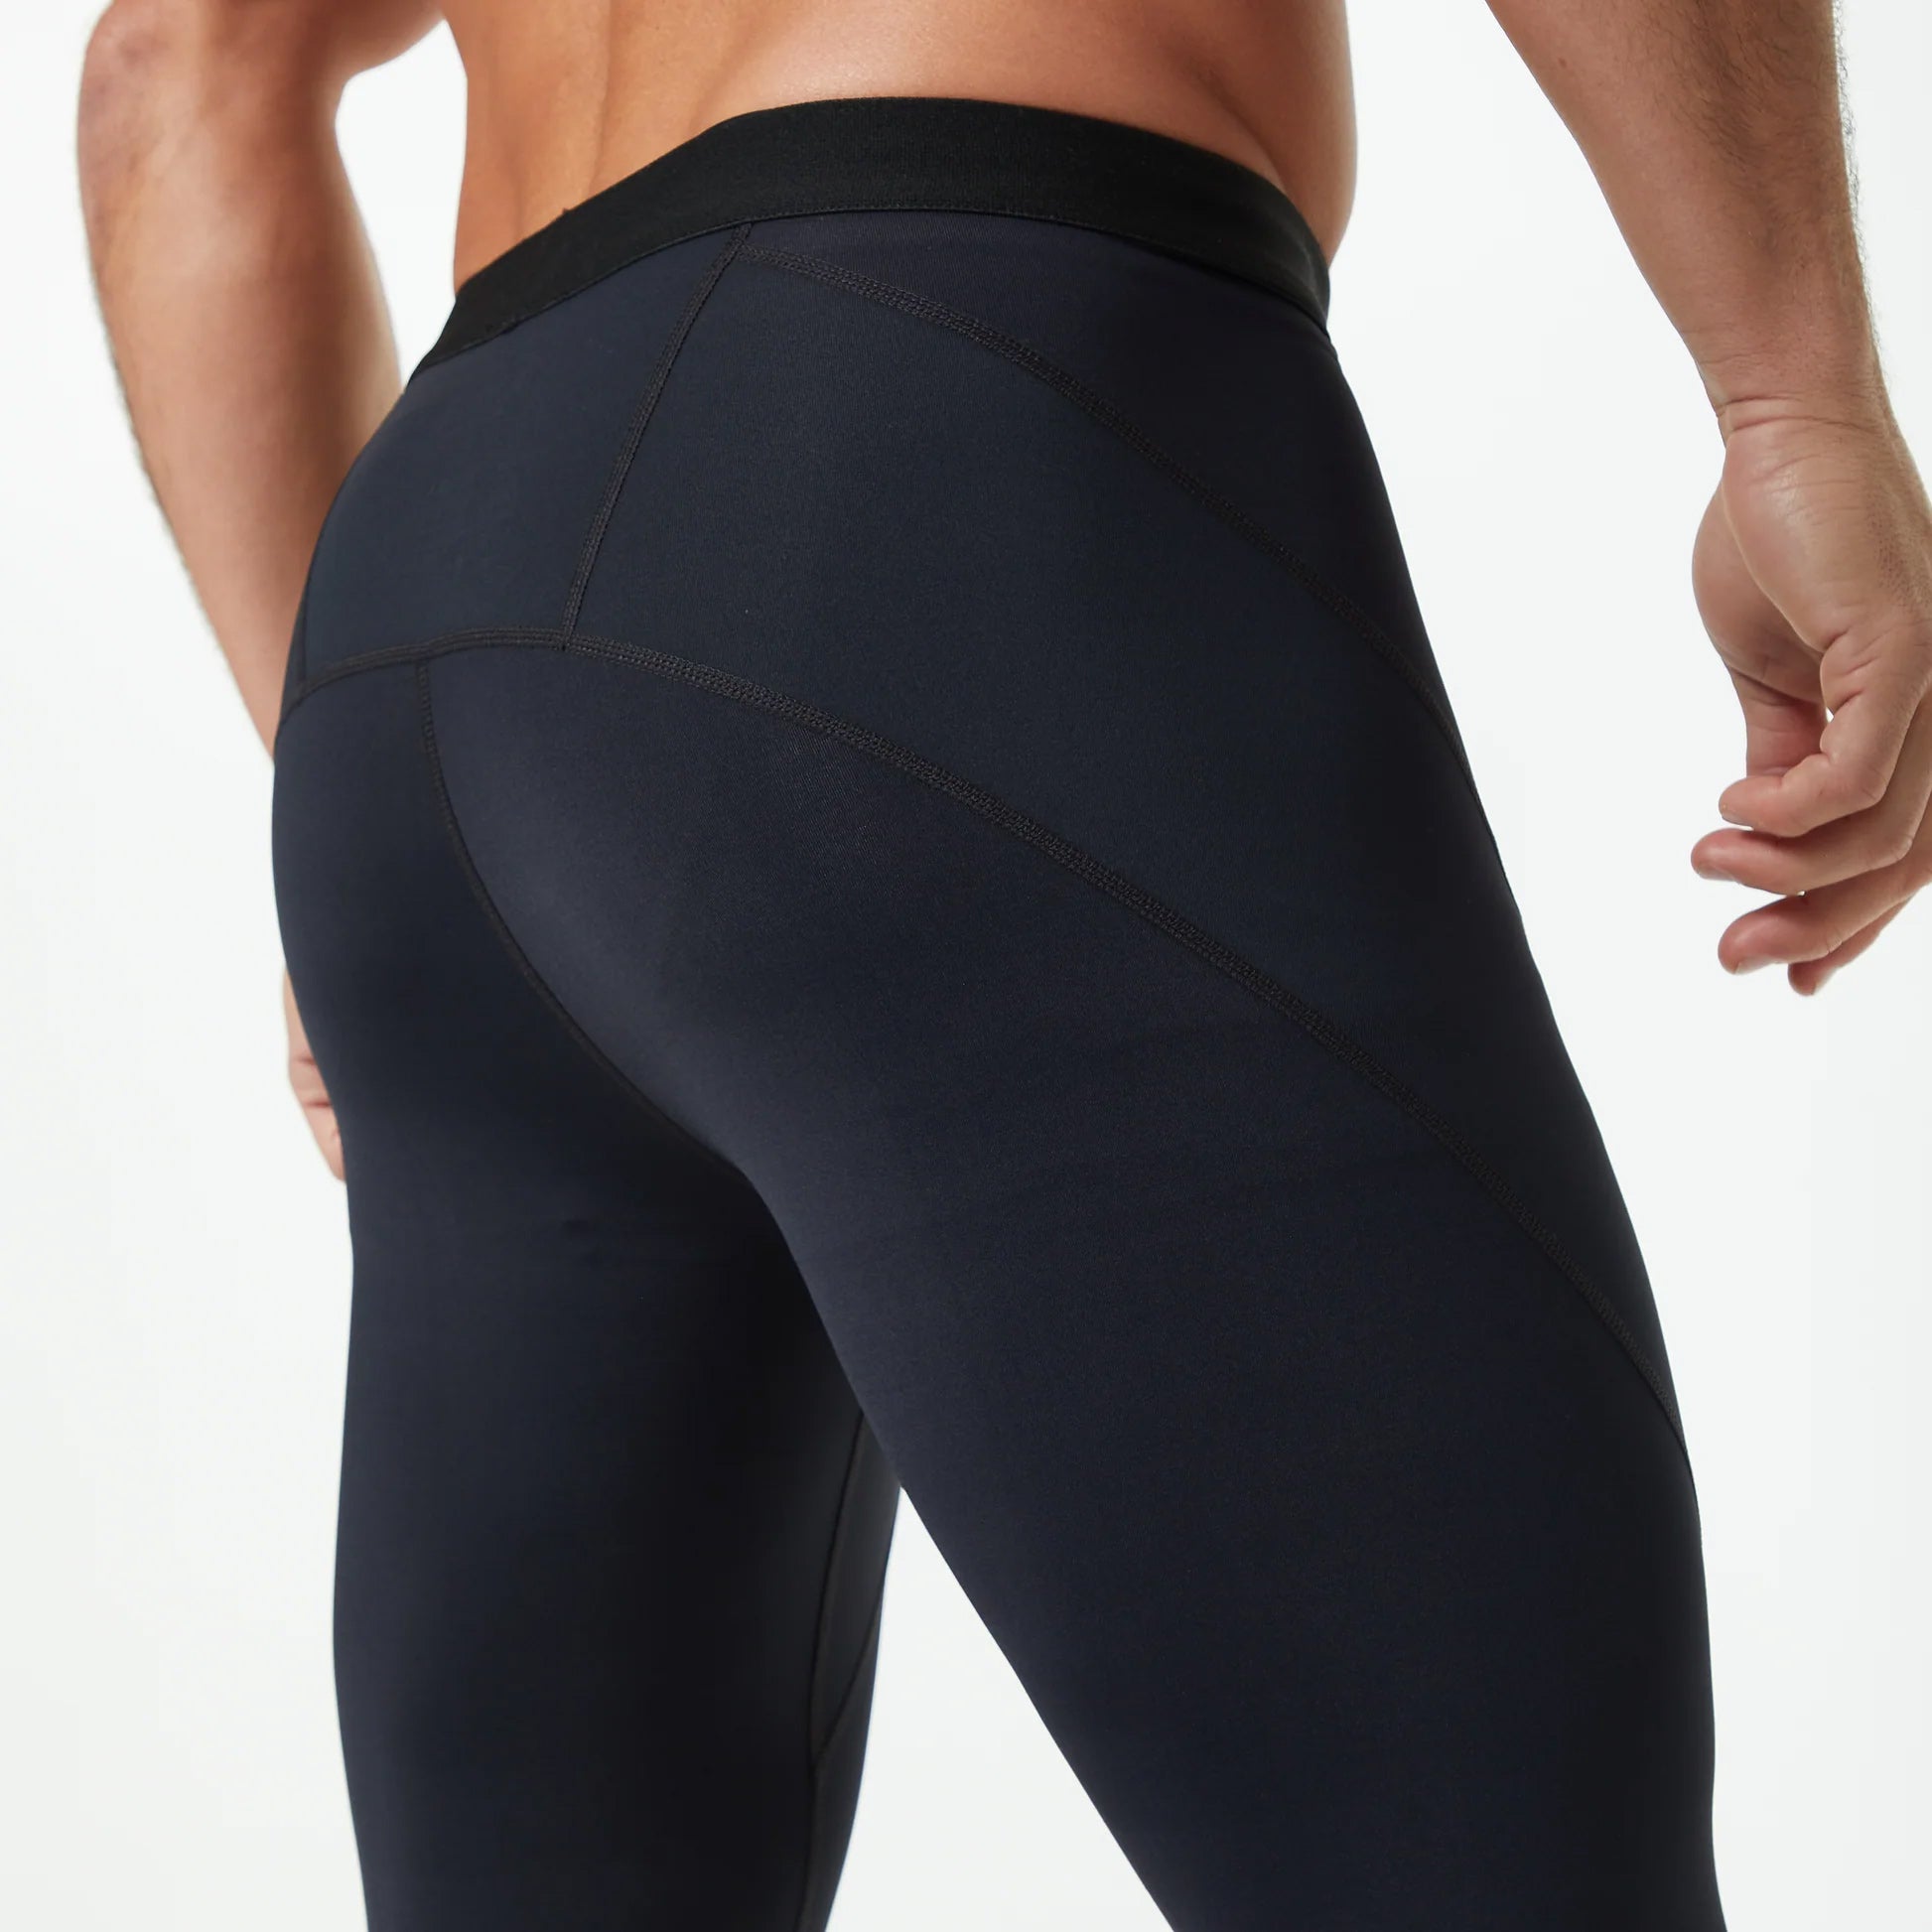 RECOVERY COMPRESSION PANTS – BLACK - Gioca